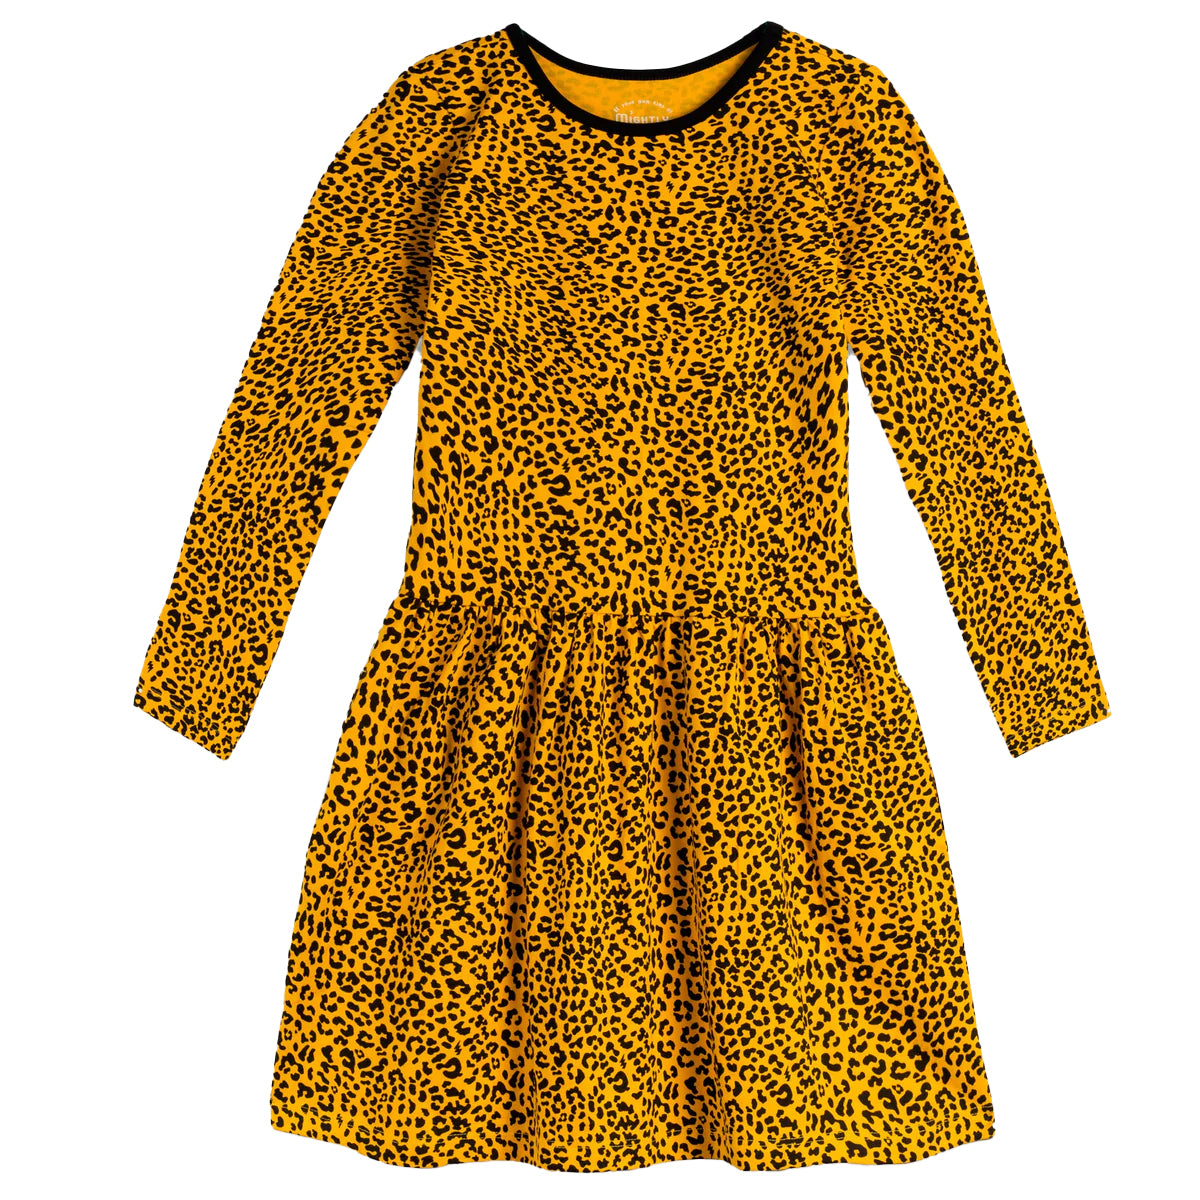 Pre-owned Gold Leopard Dress size: 2-5T